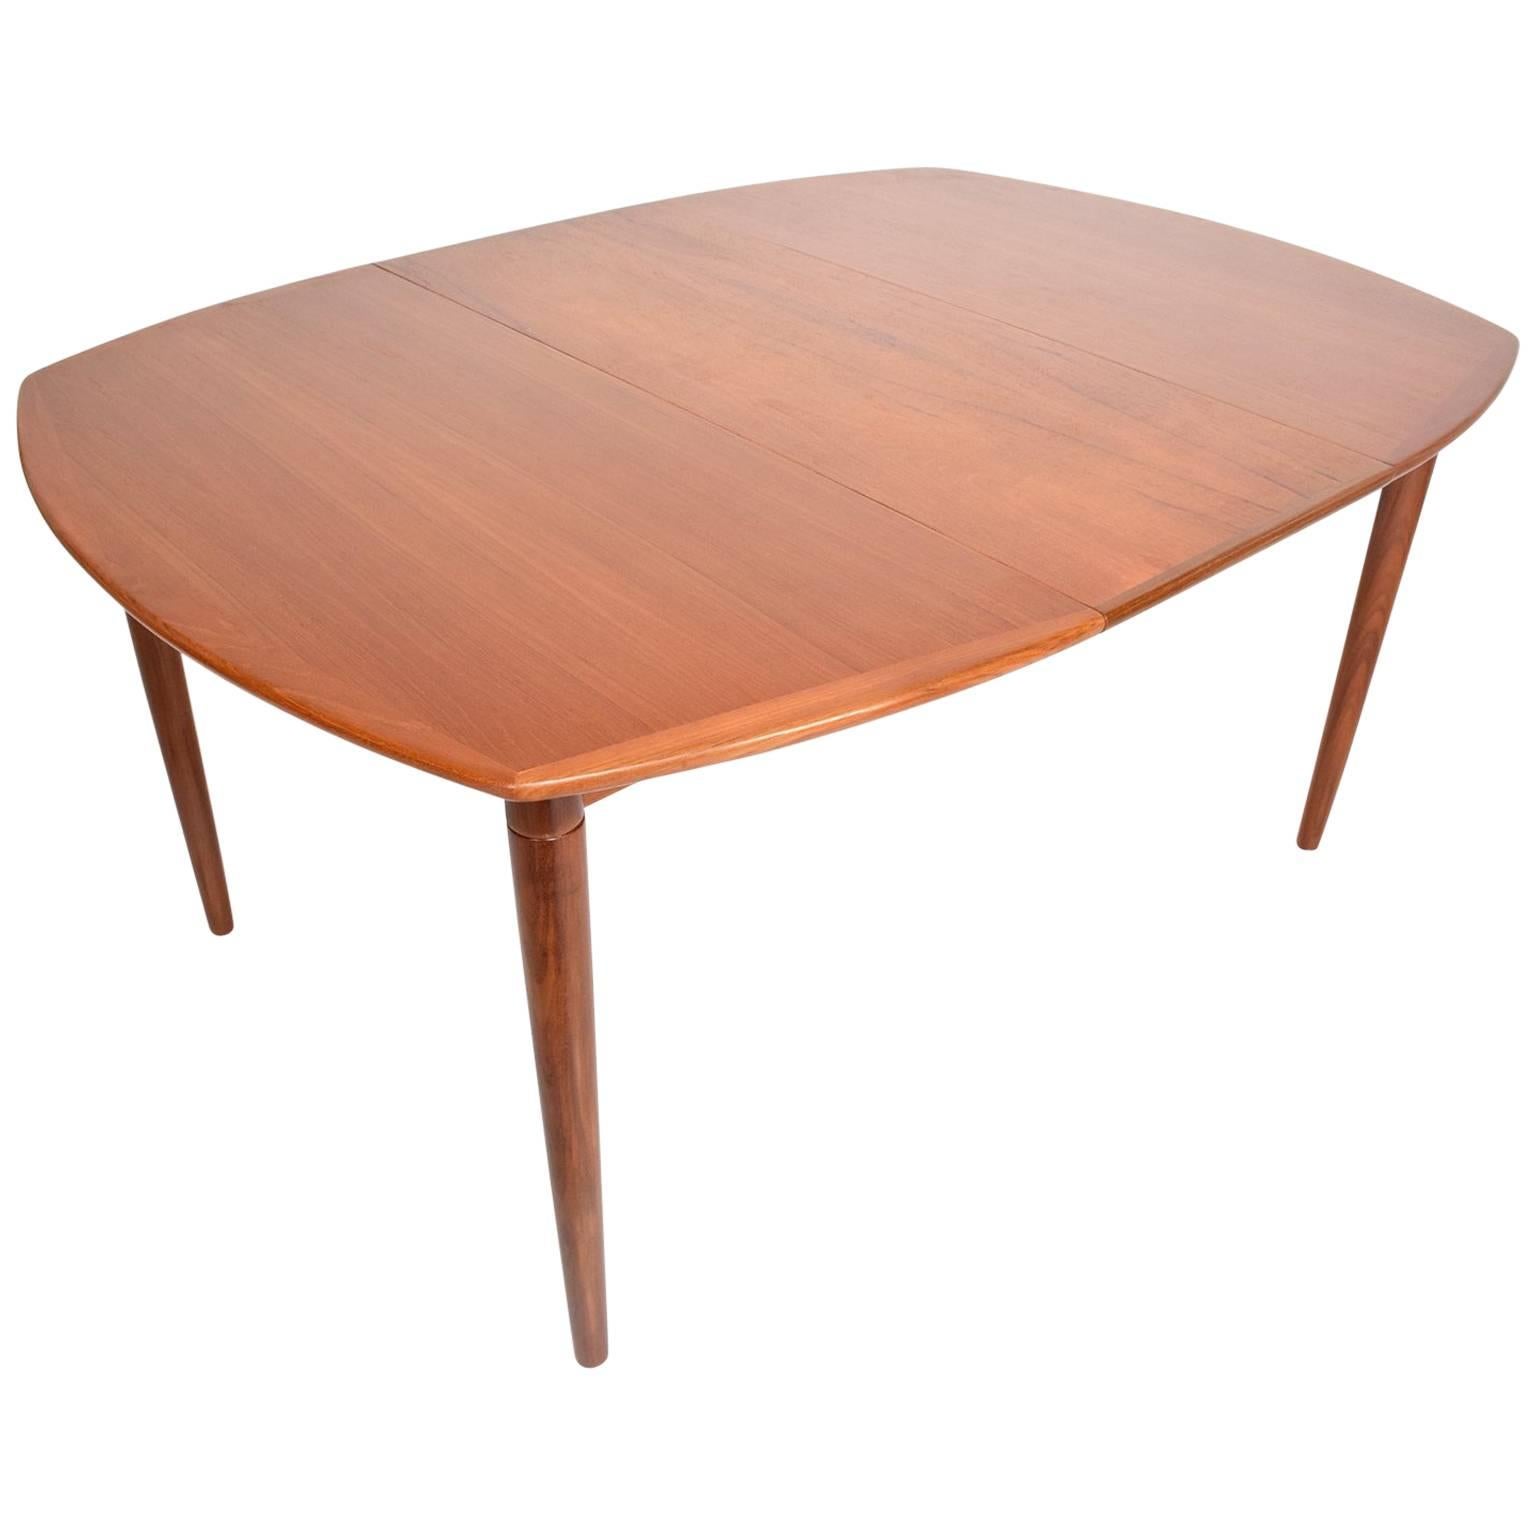 Mid-Century Danish Modern Teak Dining Table with Two Extensions